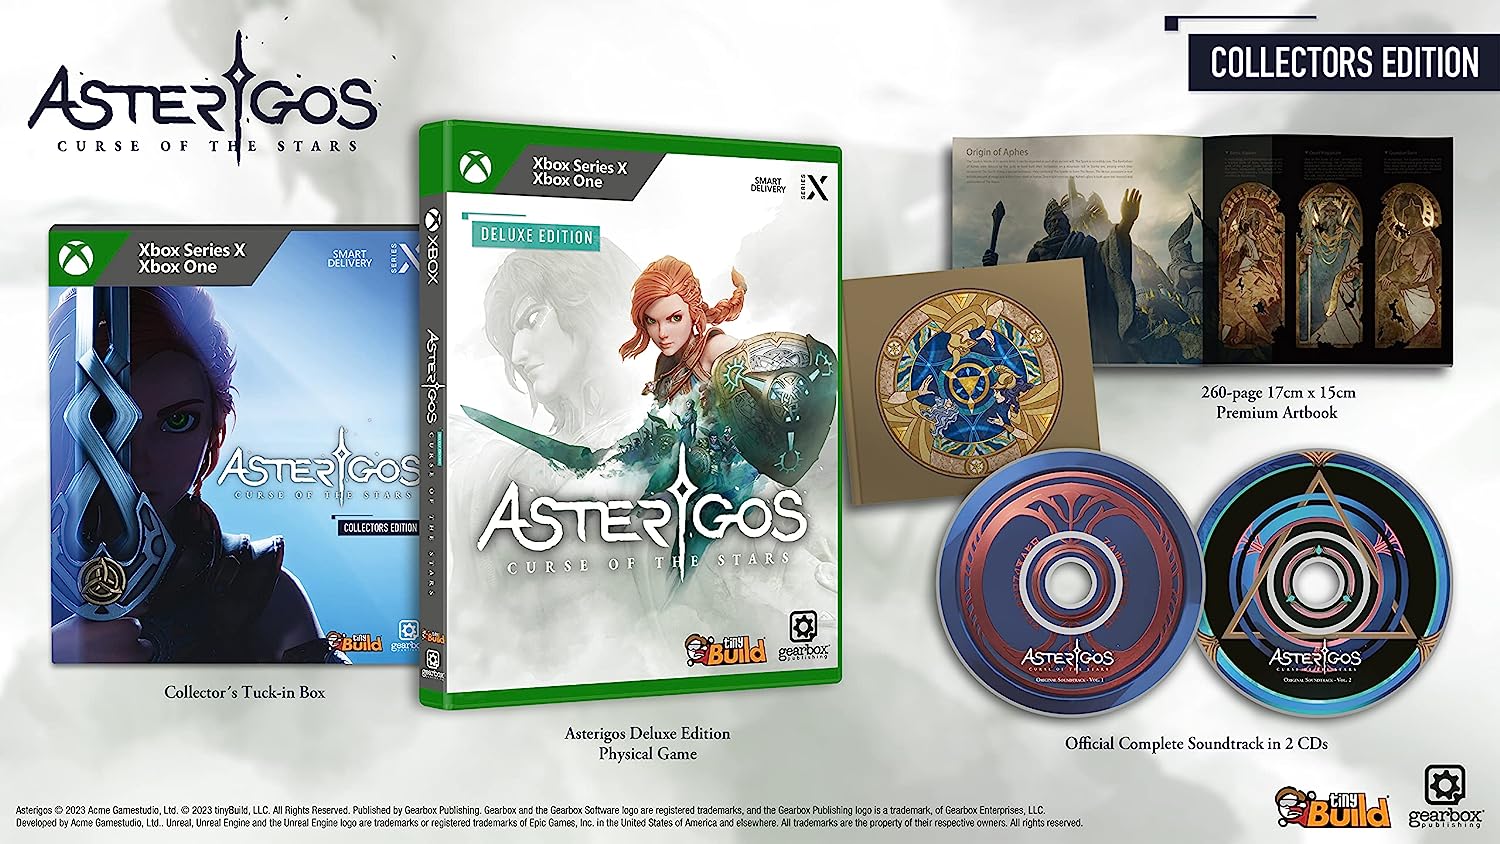 Asterigos: Curse of the Stars - Collector's Edition - [Xbox One/Series X]